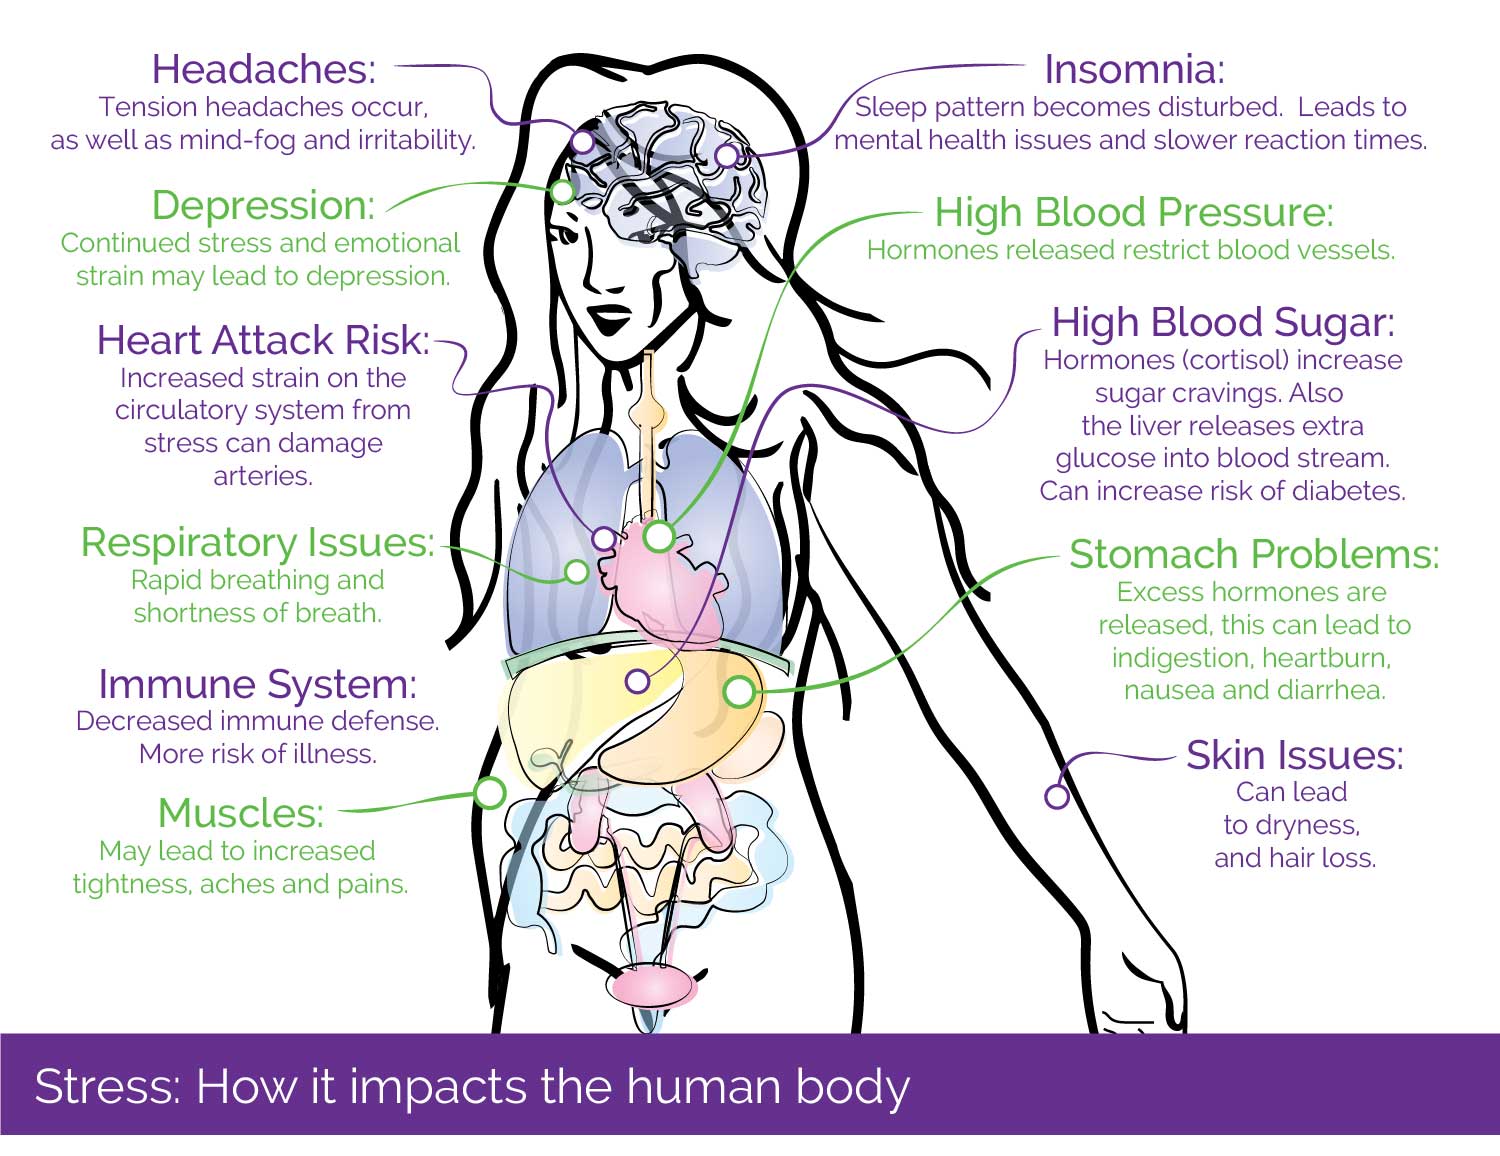 how stress impacts the body: headaches, depression, heart attack risk, respiratory issues, immune system, muscles, insomnia, high blood pressure, high blood sugar, stomach problems, skin issues